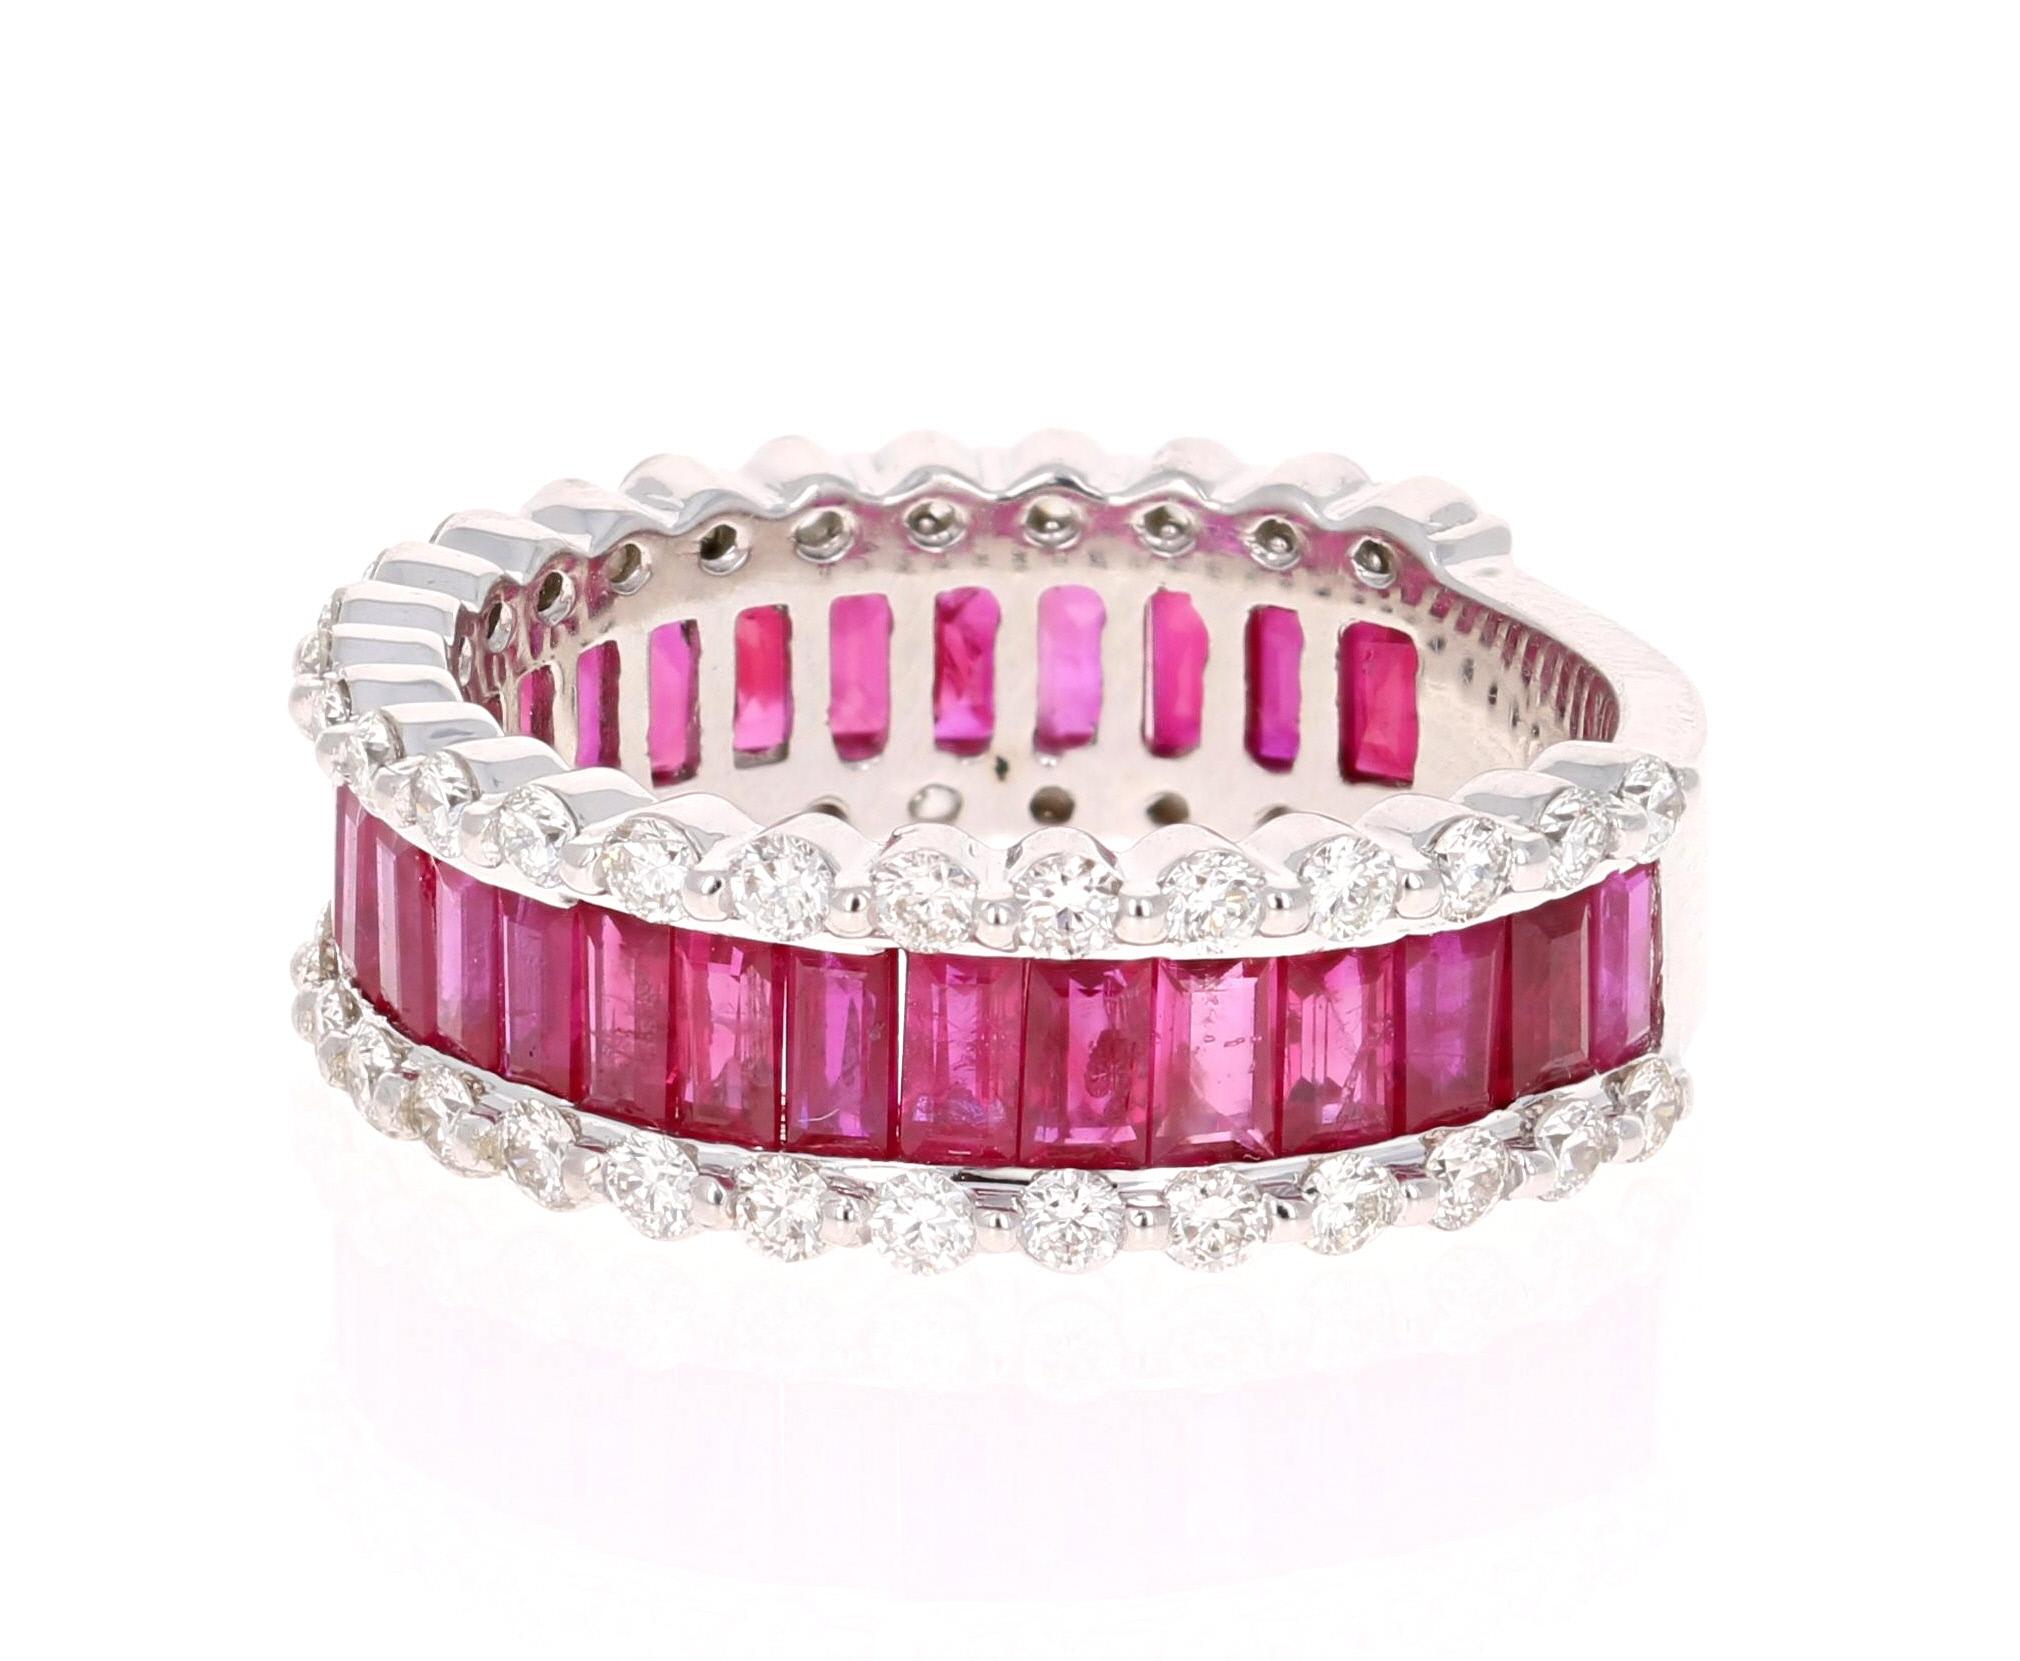 A gorgeous Ruby and Diamond Band! A daily and dazzling stunner! 

This ring has 28 Baguette Cut Rubies that weigh 2.75 Carats and 50 Round Cut Diamonds that weigh 0.89 Carats with a clarity and color of VS-H. 

The ring is casted in 14K White Gold